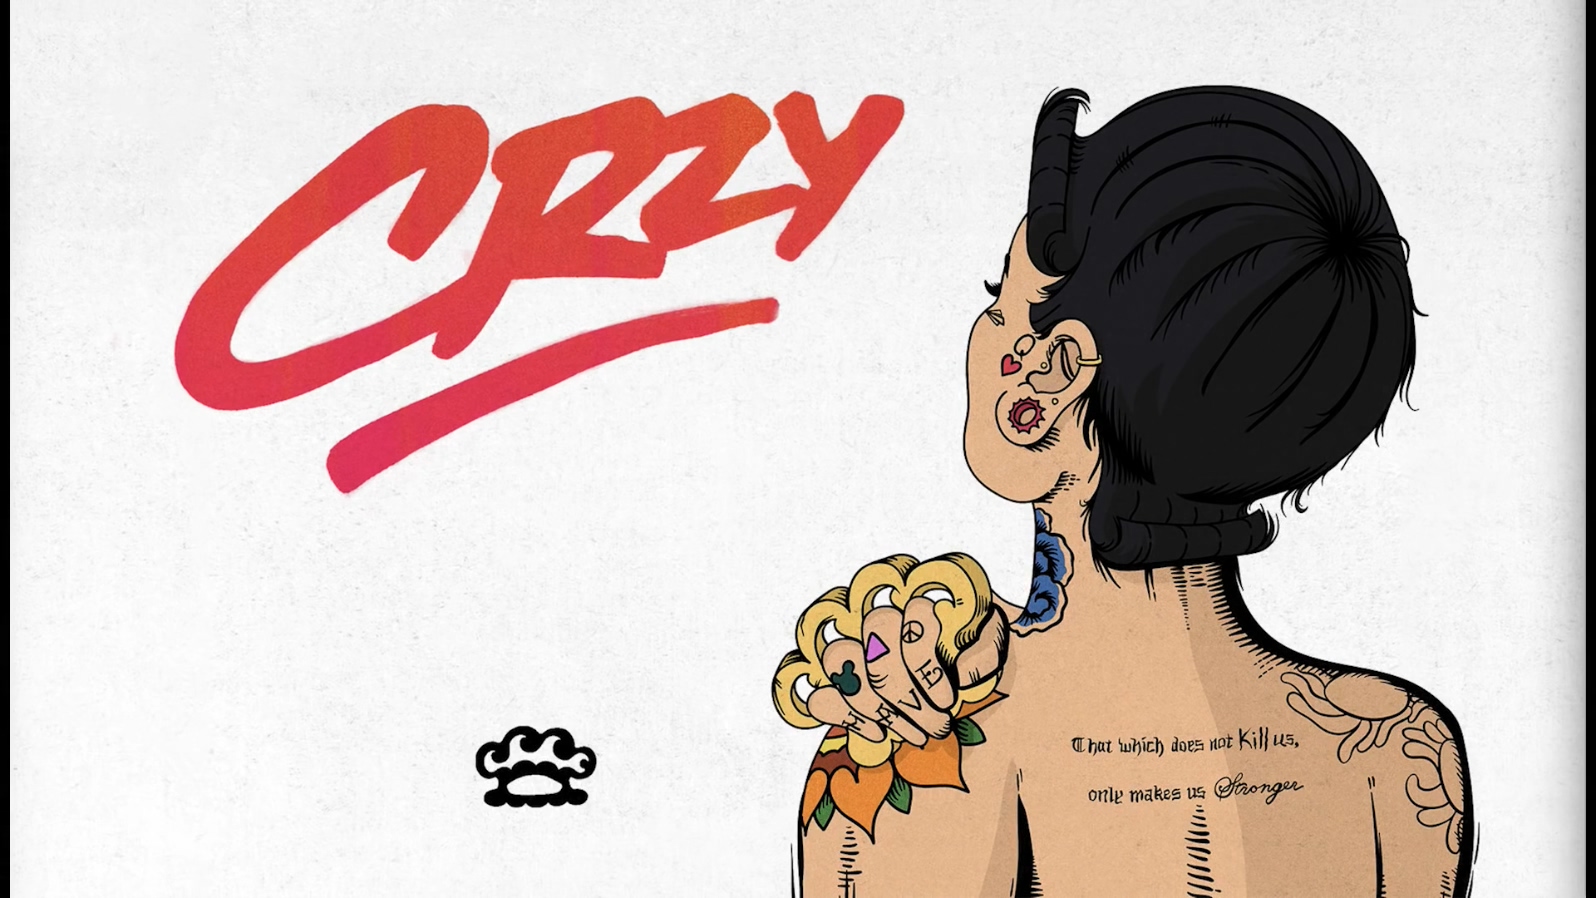 Kehlani - CRZY (Official Video) - 1080P